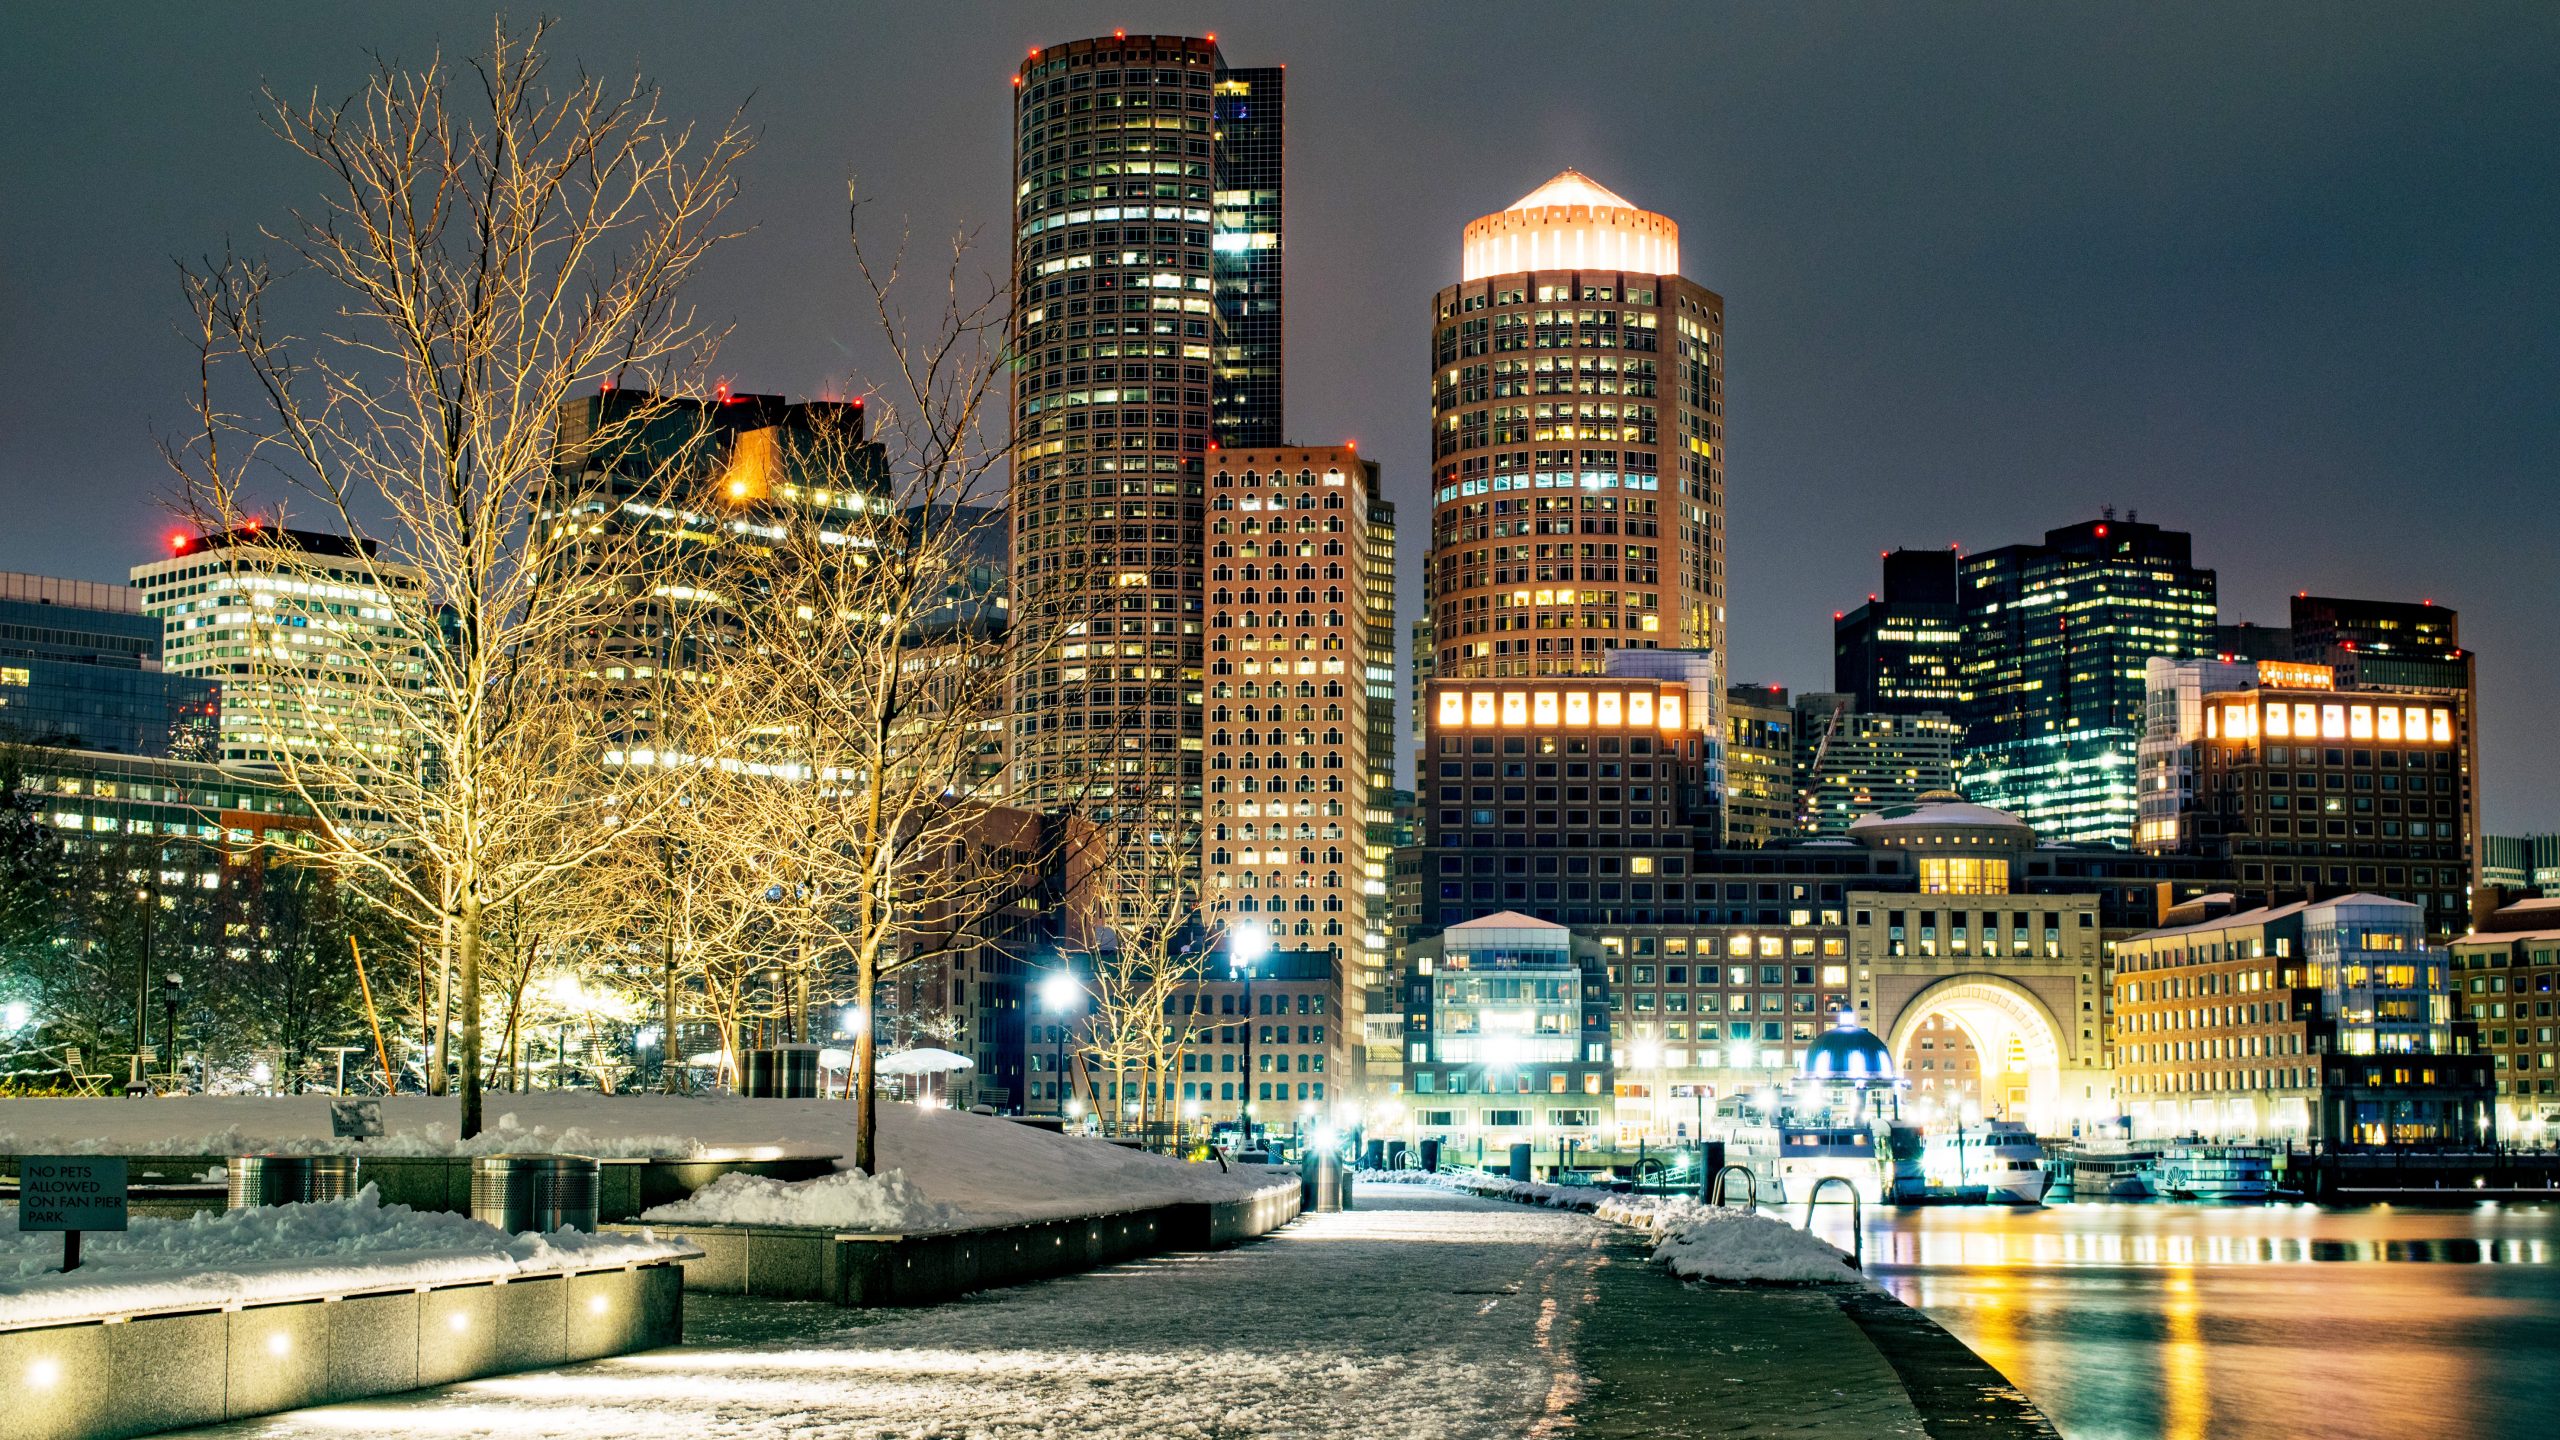 25 Best Views Of The Boston Skyline Mapped